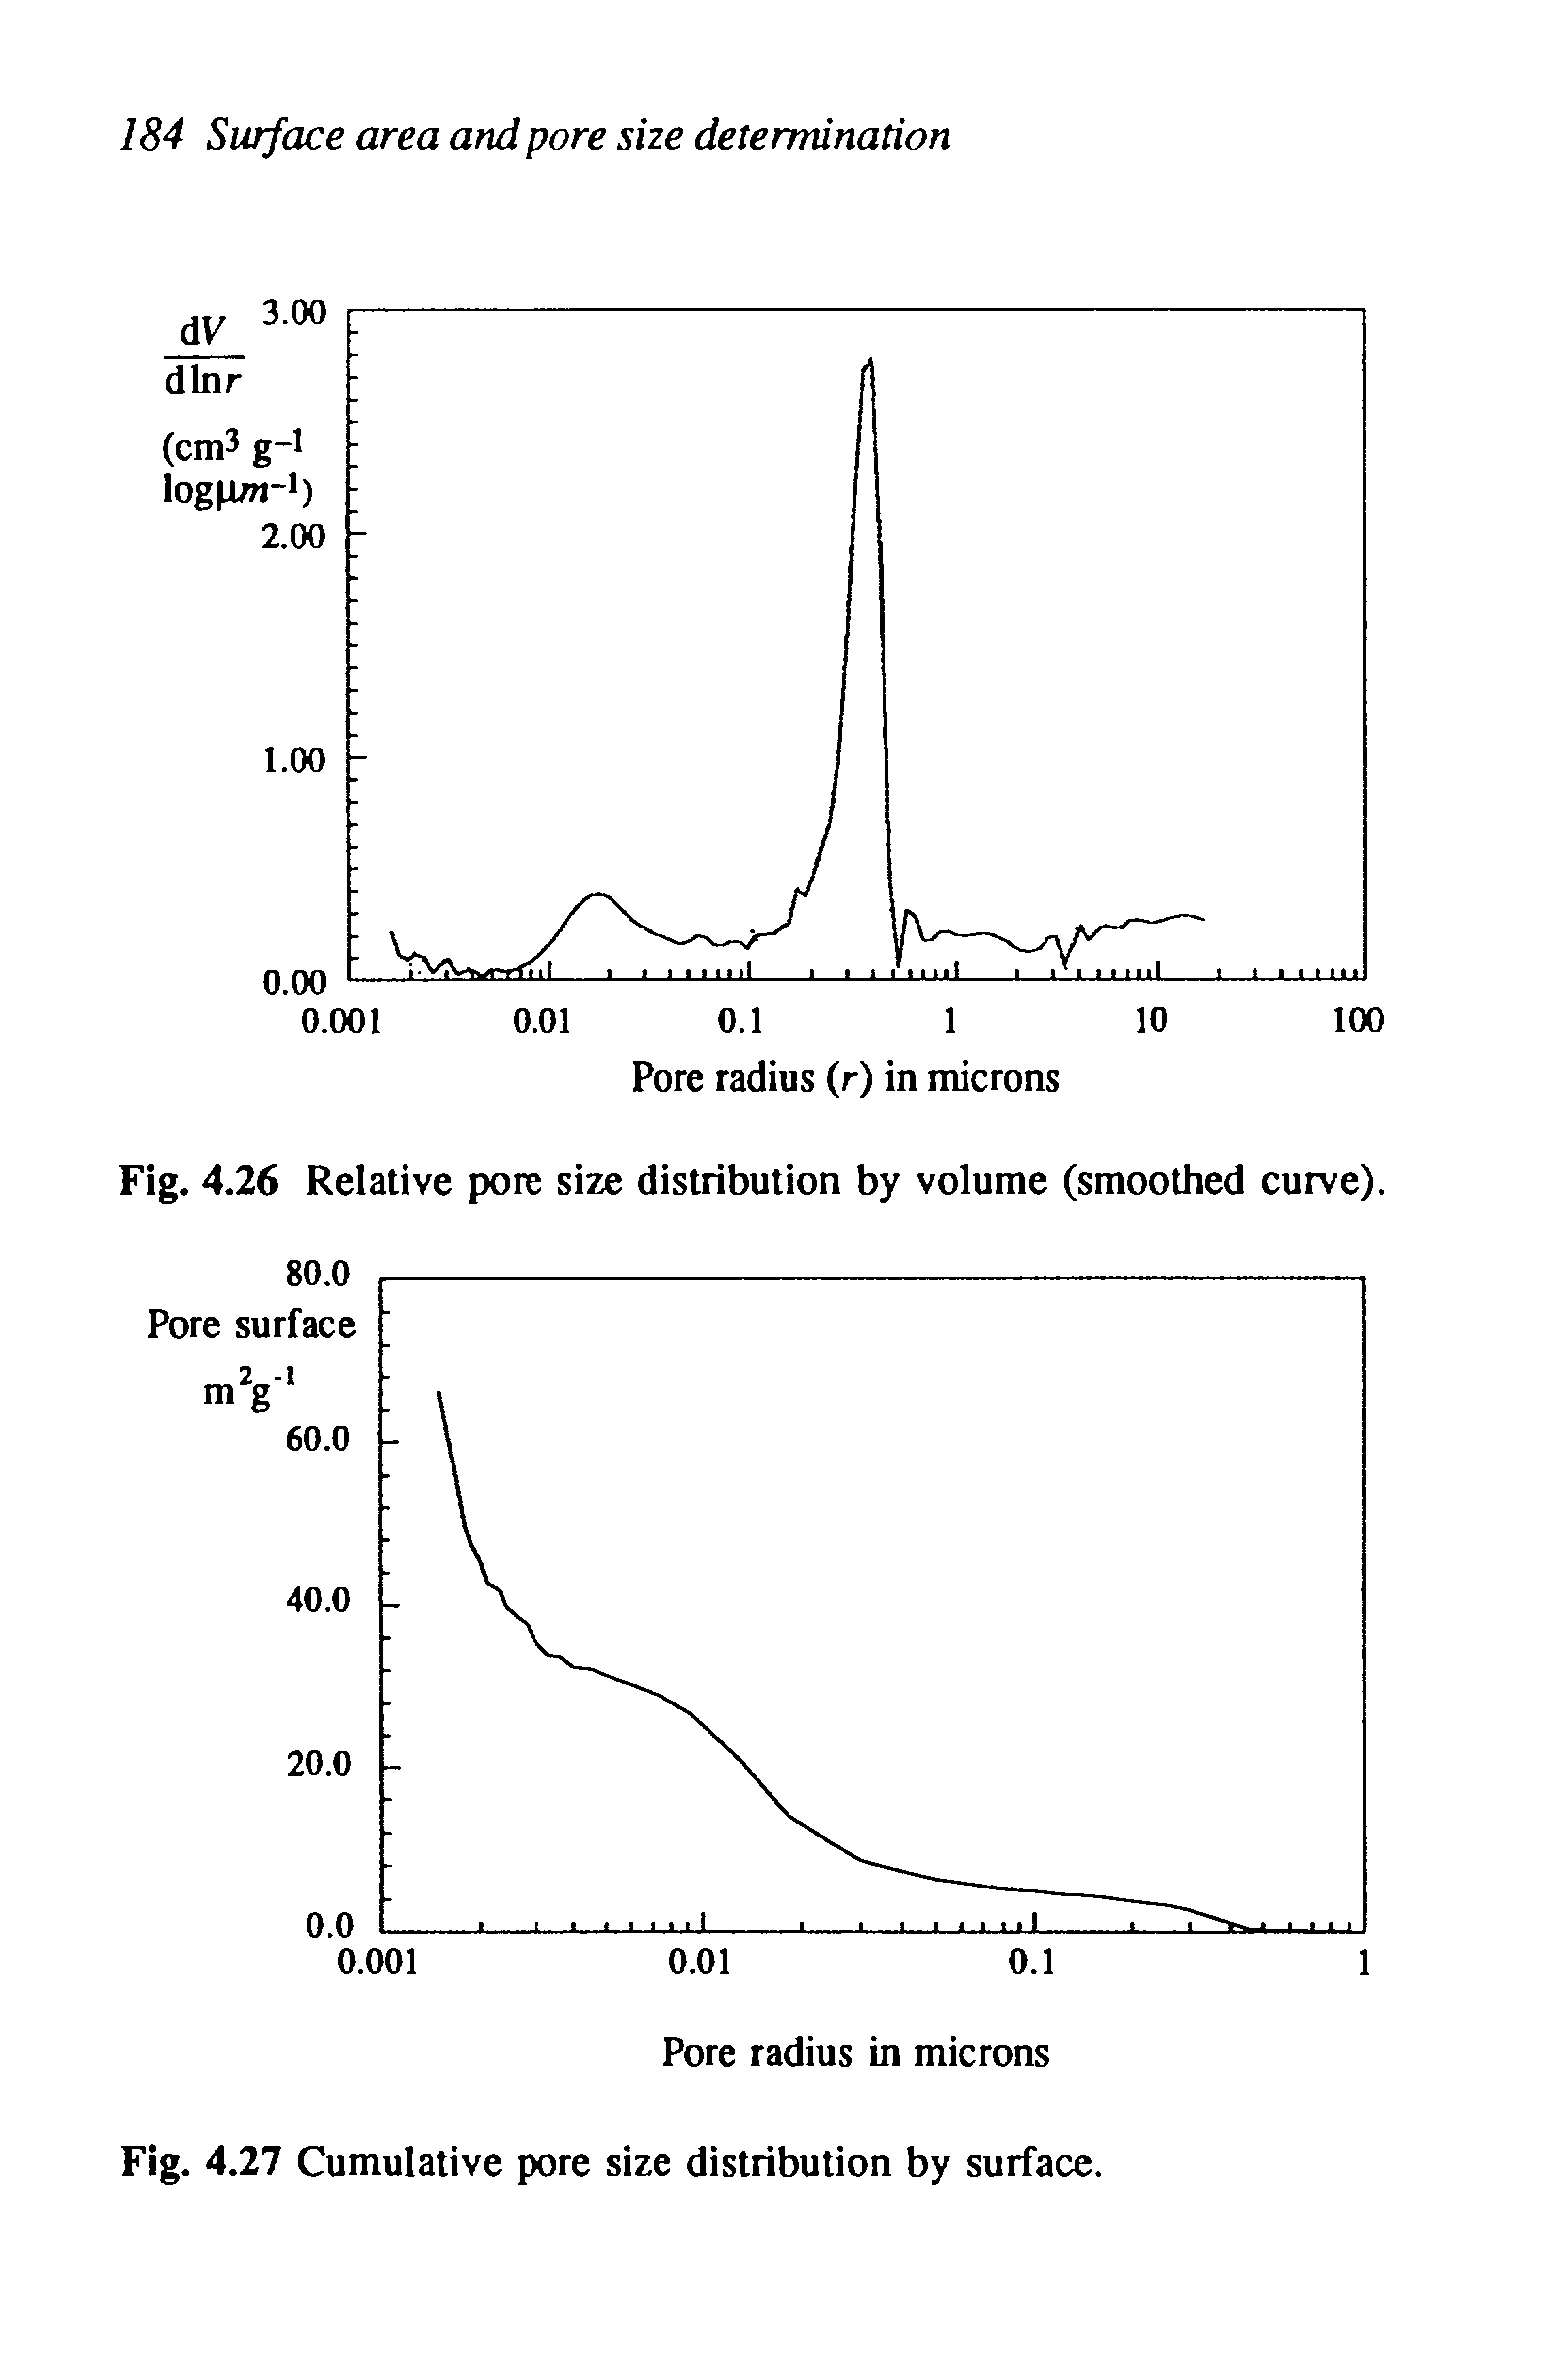 Fig. 4.26 Relative pore size distribution by volume (smoothed curve).